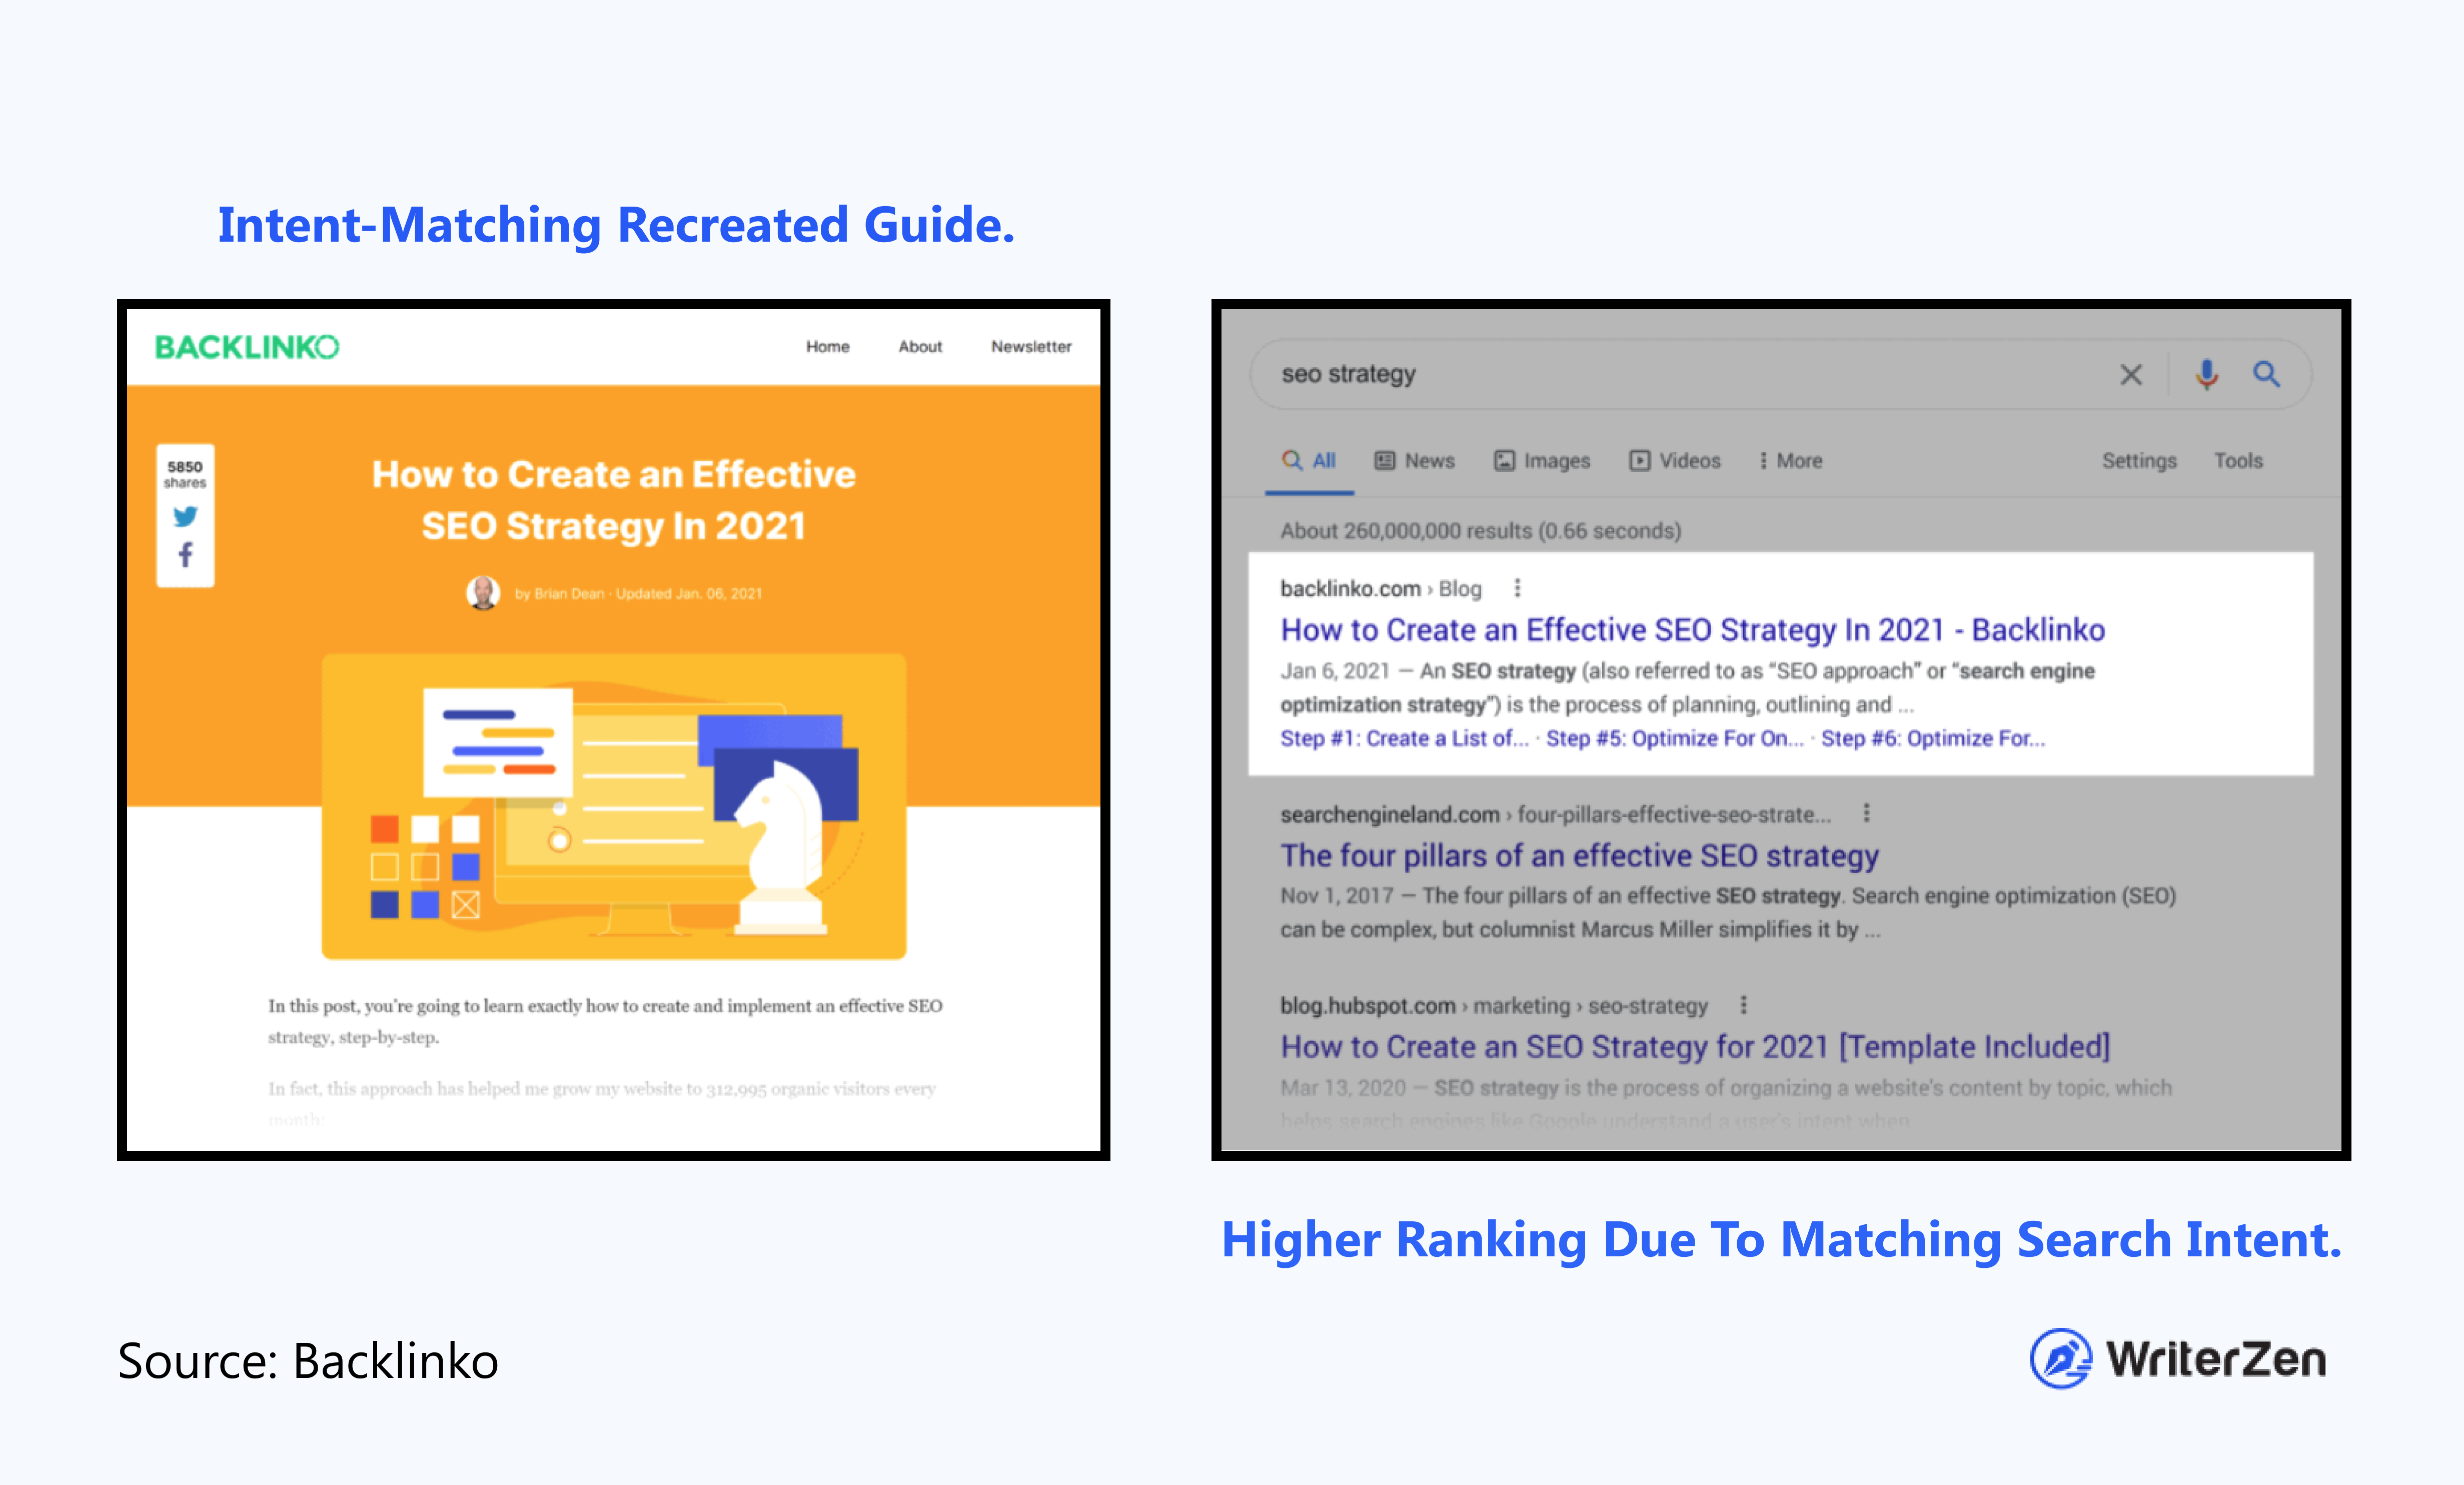 Intent-matching guide dominating the SERPs